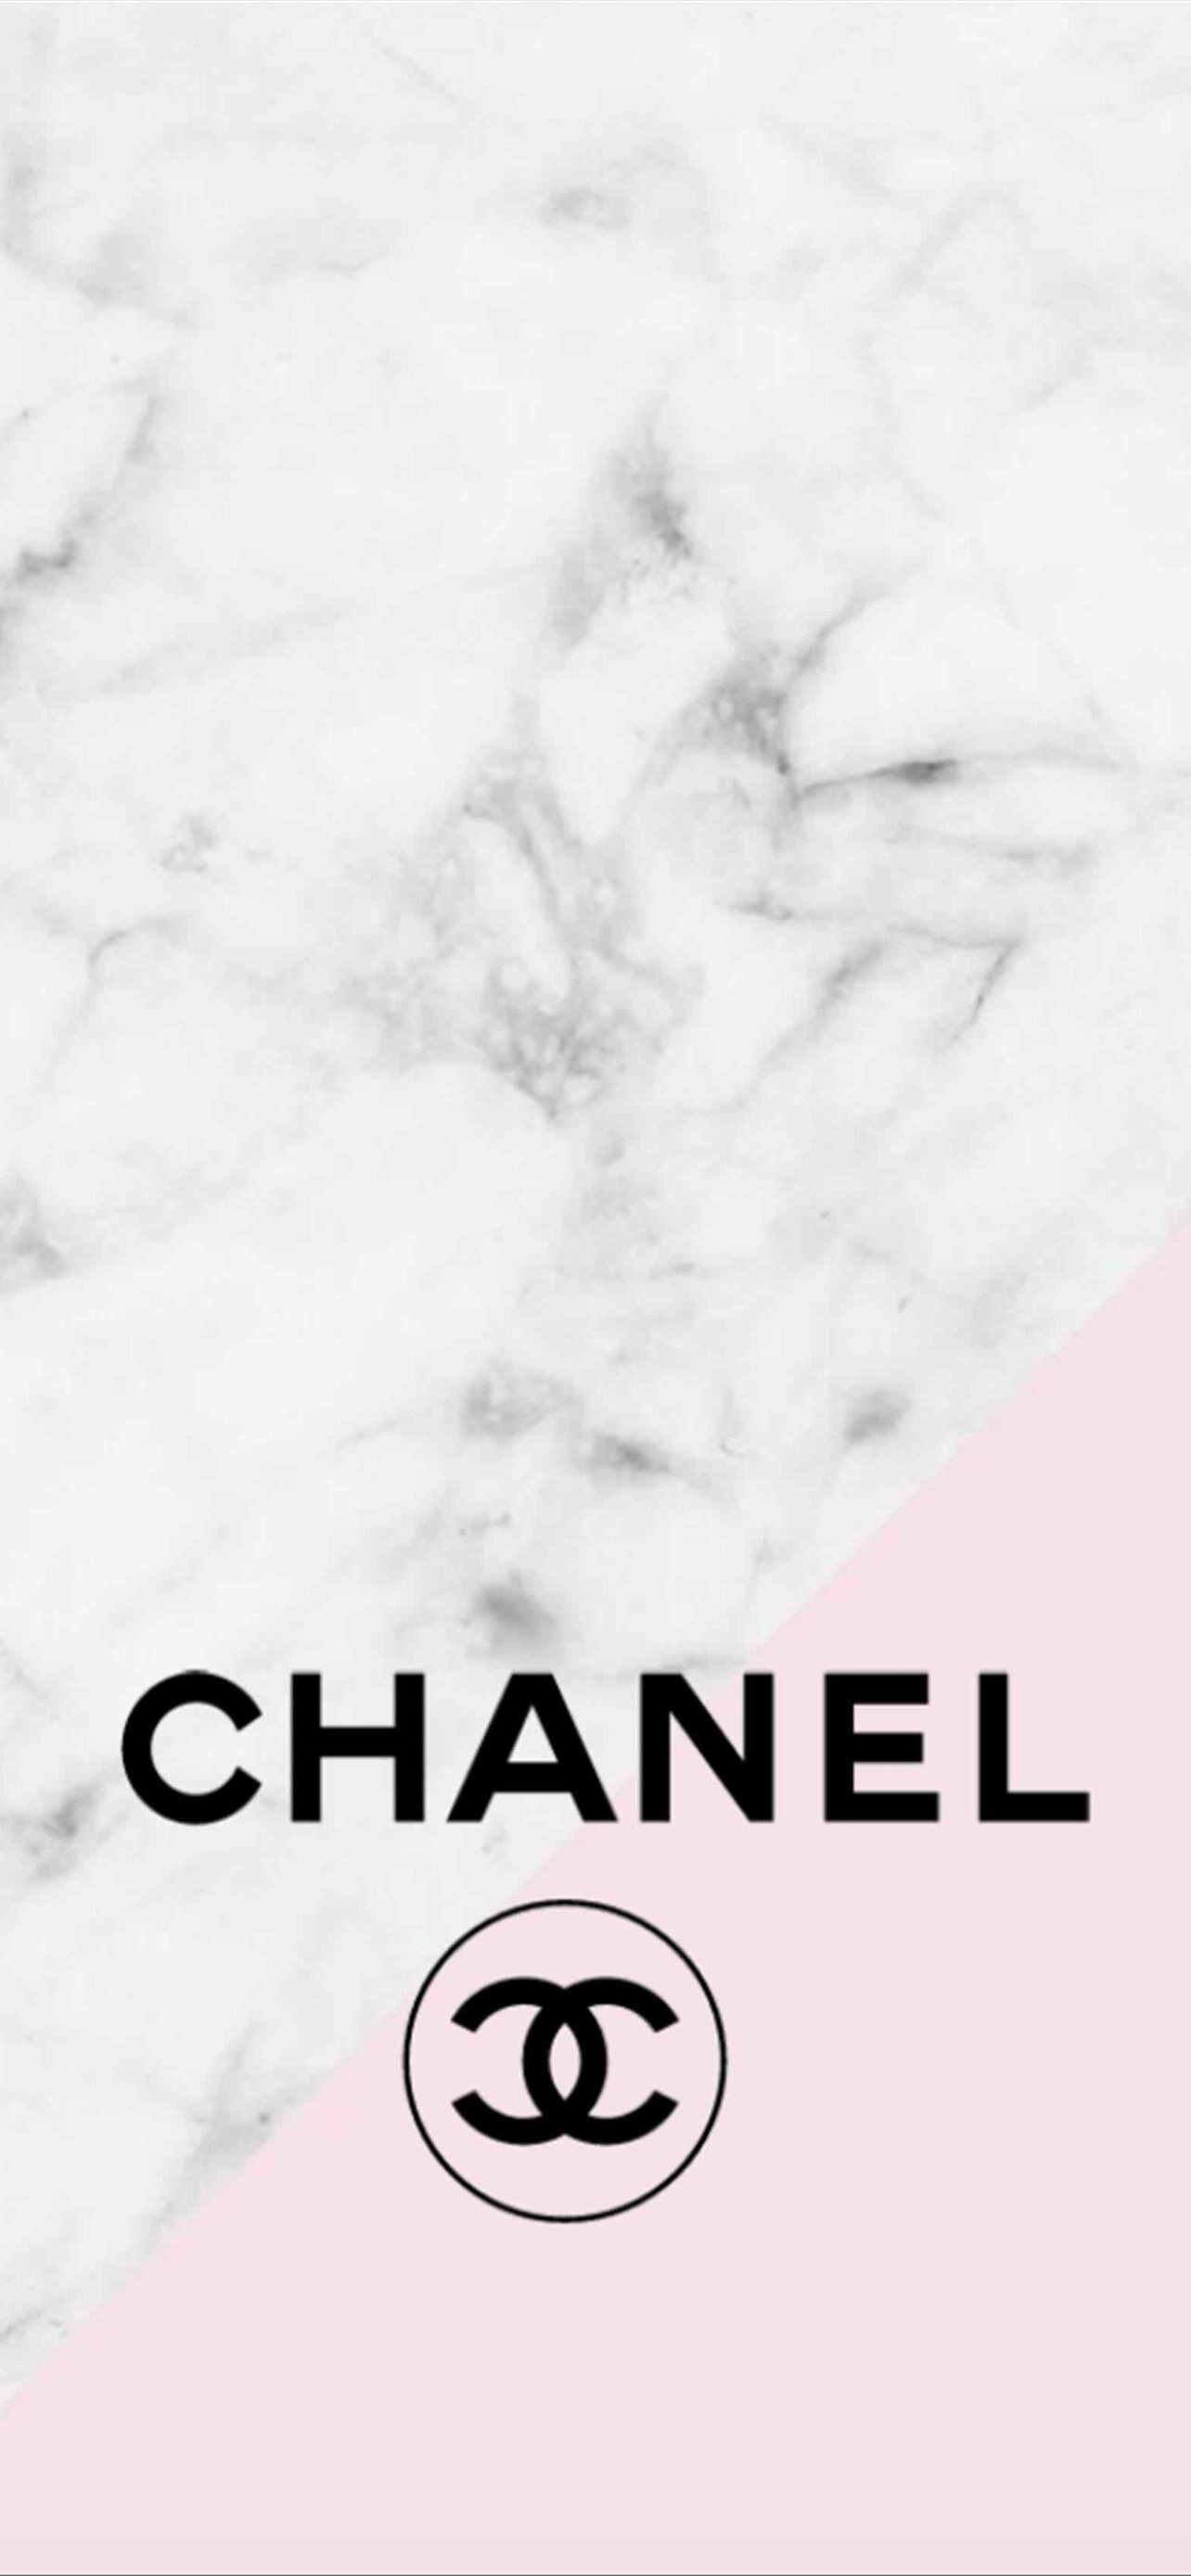 Best Coco Chanel iPhone wallpapers, High-definition imagery, Coco Chanel essence, Fashion inspiration, 1290x2780 HD Phone